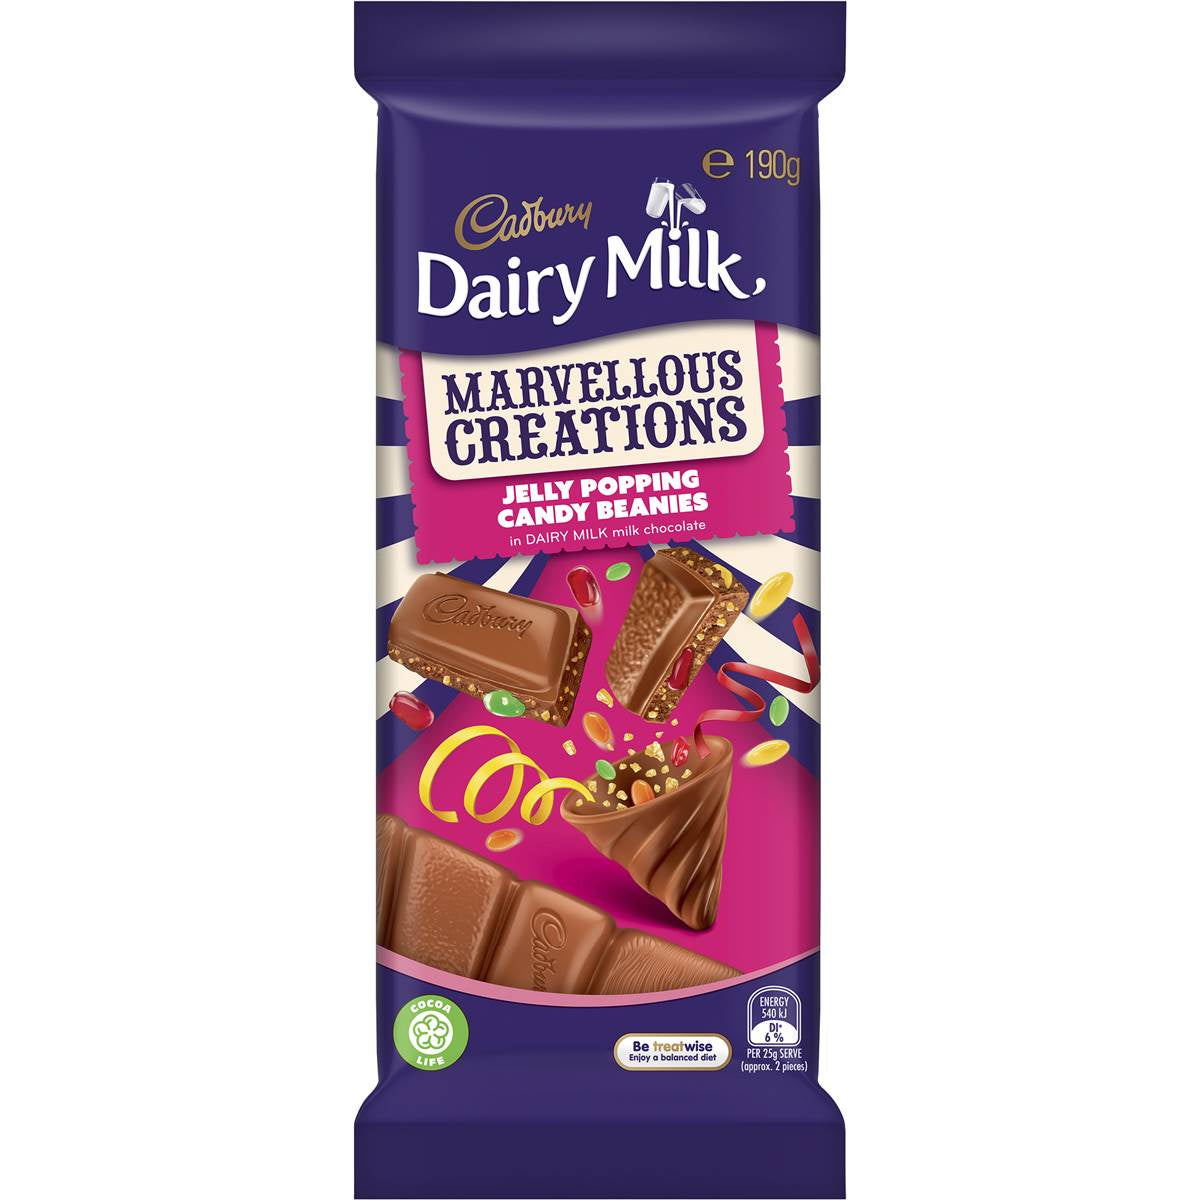 Cadbury Dairy Milk Marvellous Creations Jelly Popping Candy 190G